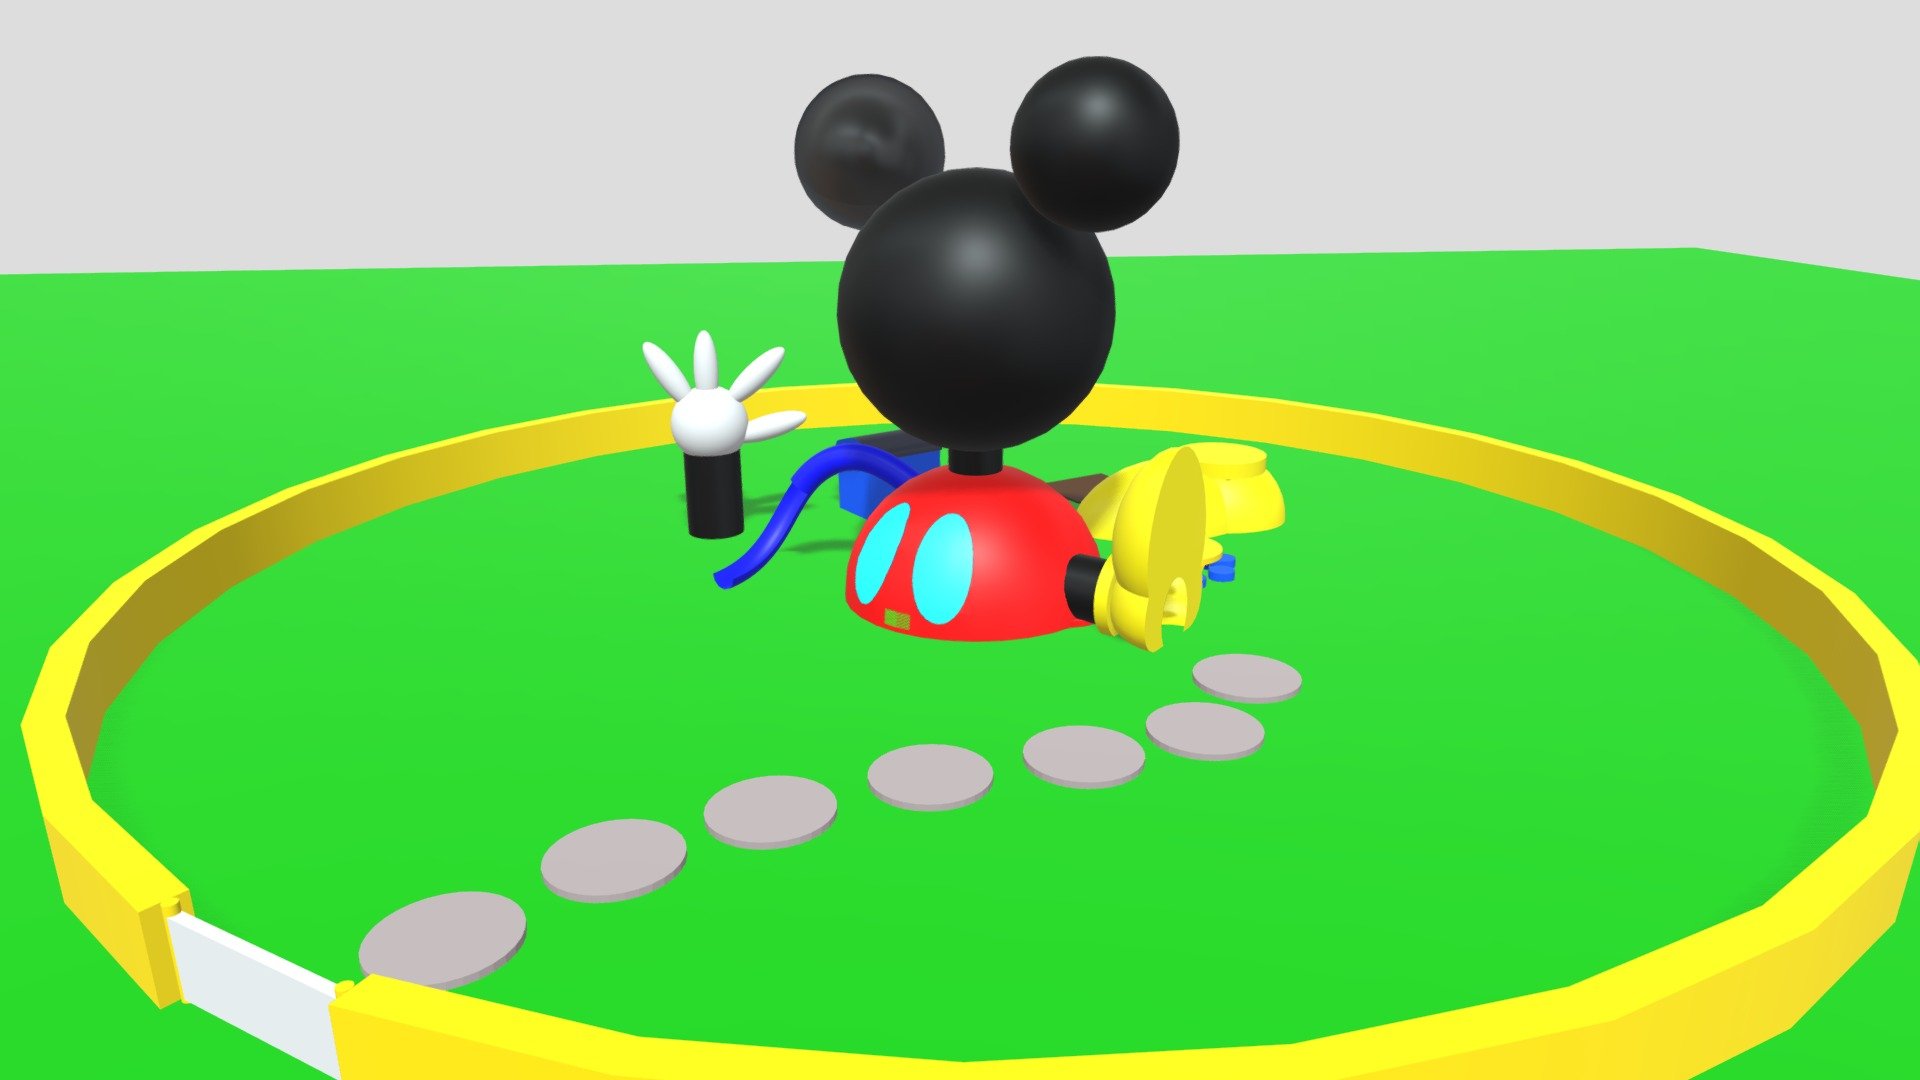 The Mickey Mouse Clubhouse - Download Free 3D model by Basic 3D  (@RandomItemsandstuff) [ffa5a54]